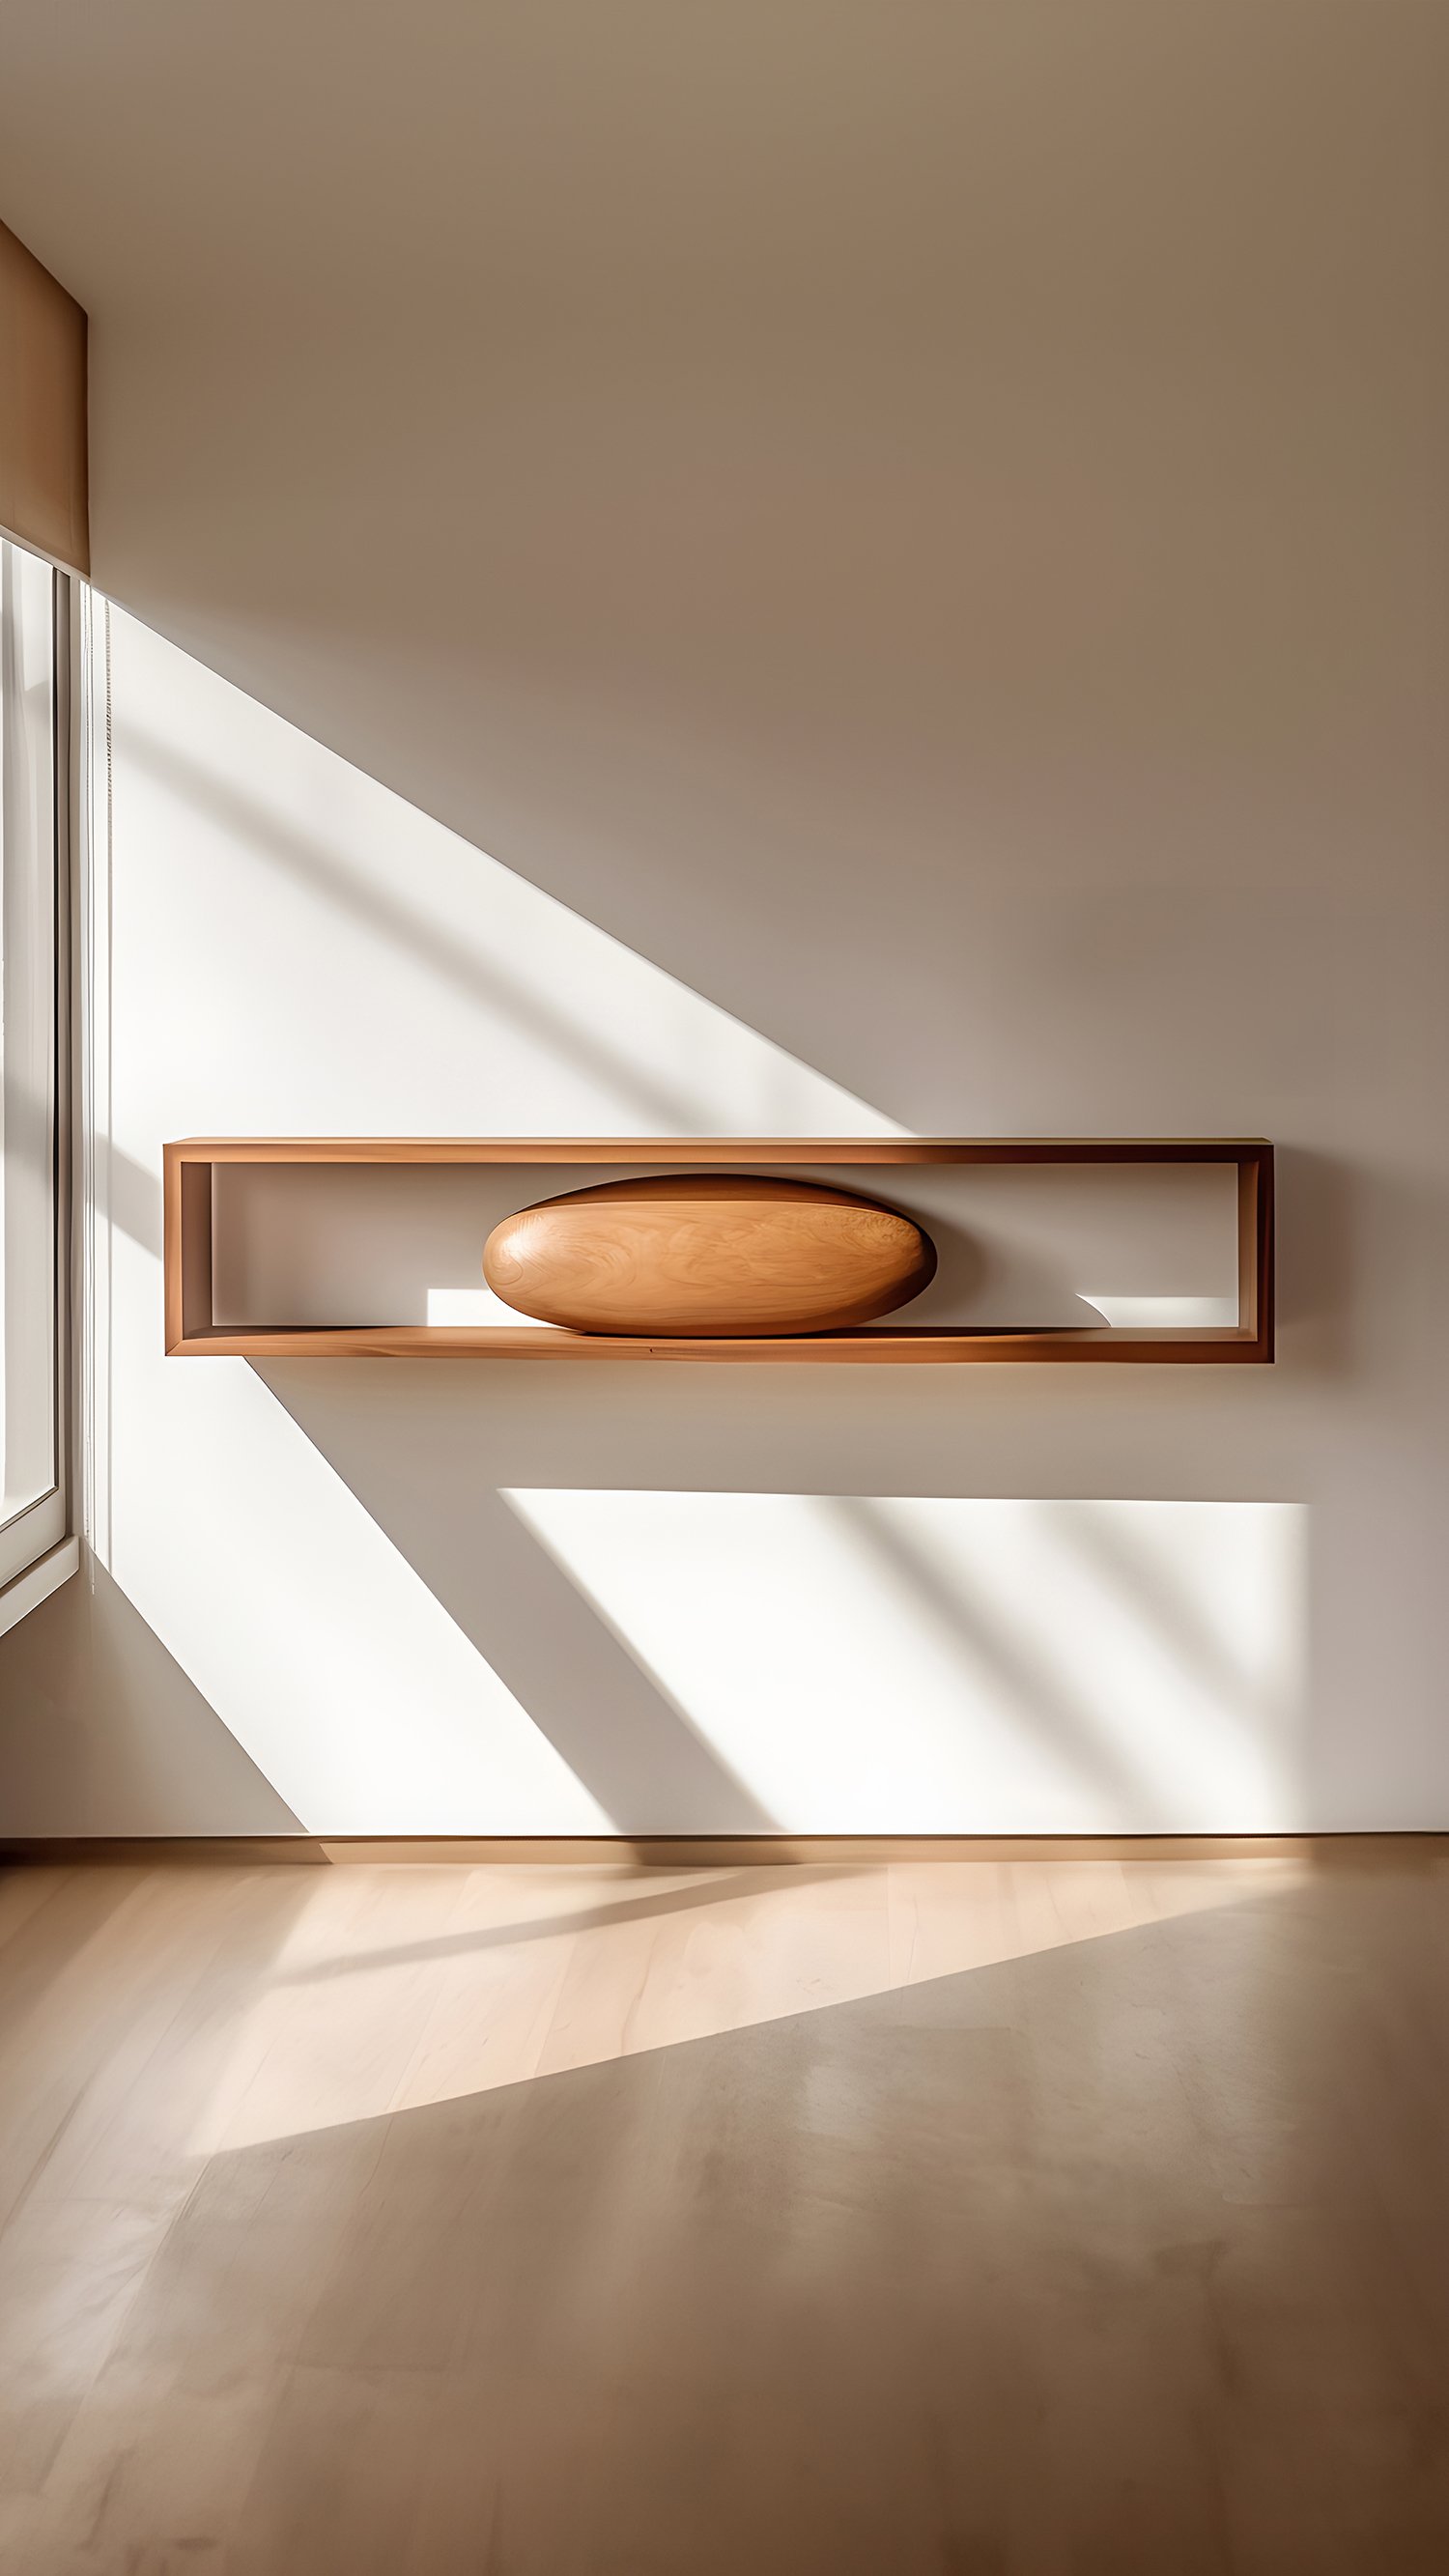 Large Rectangular Floating Shelf with One Sculptural Wooden Pebble Accent, Sereno by Joel Escalon — 5.jpg